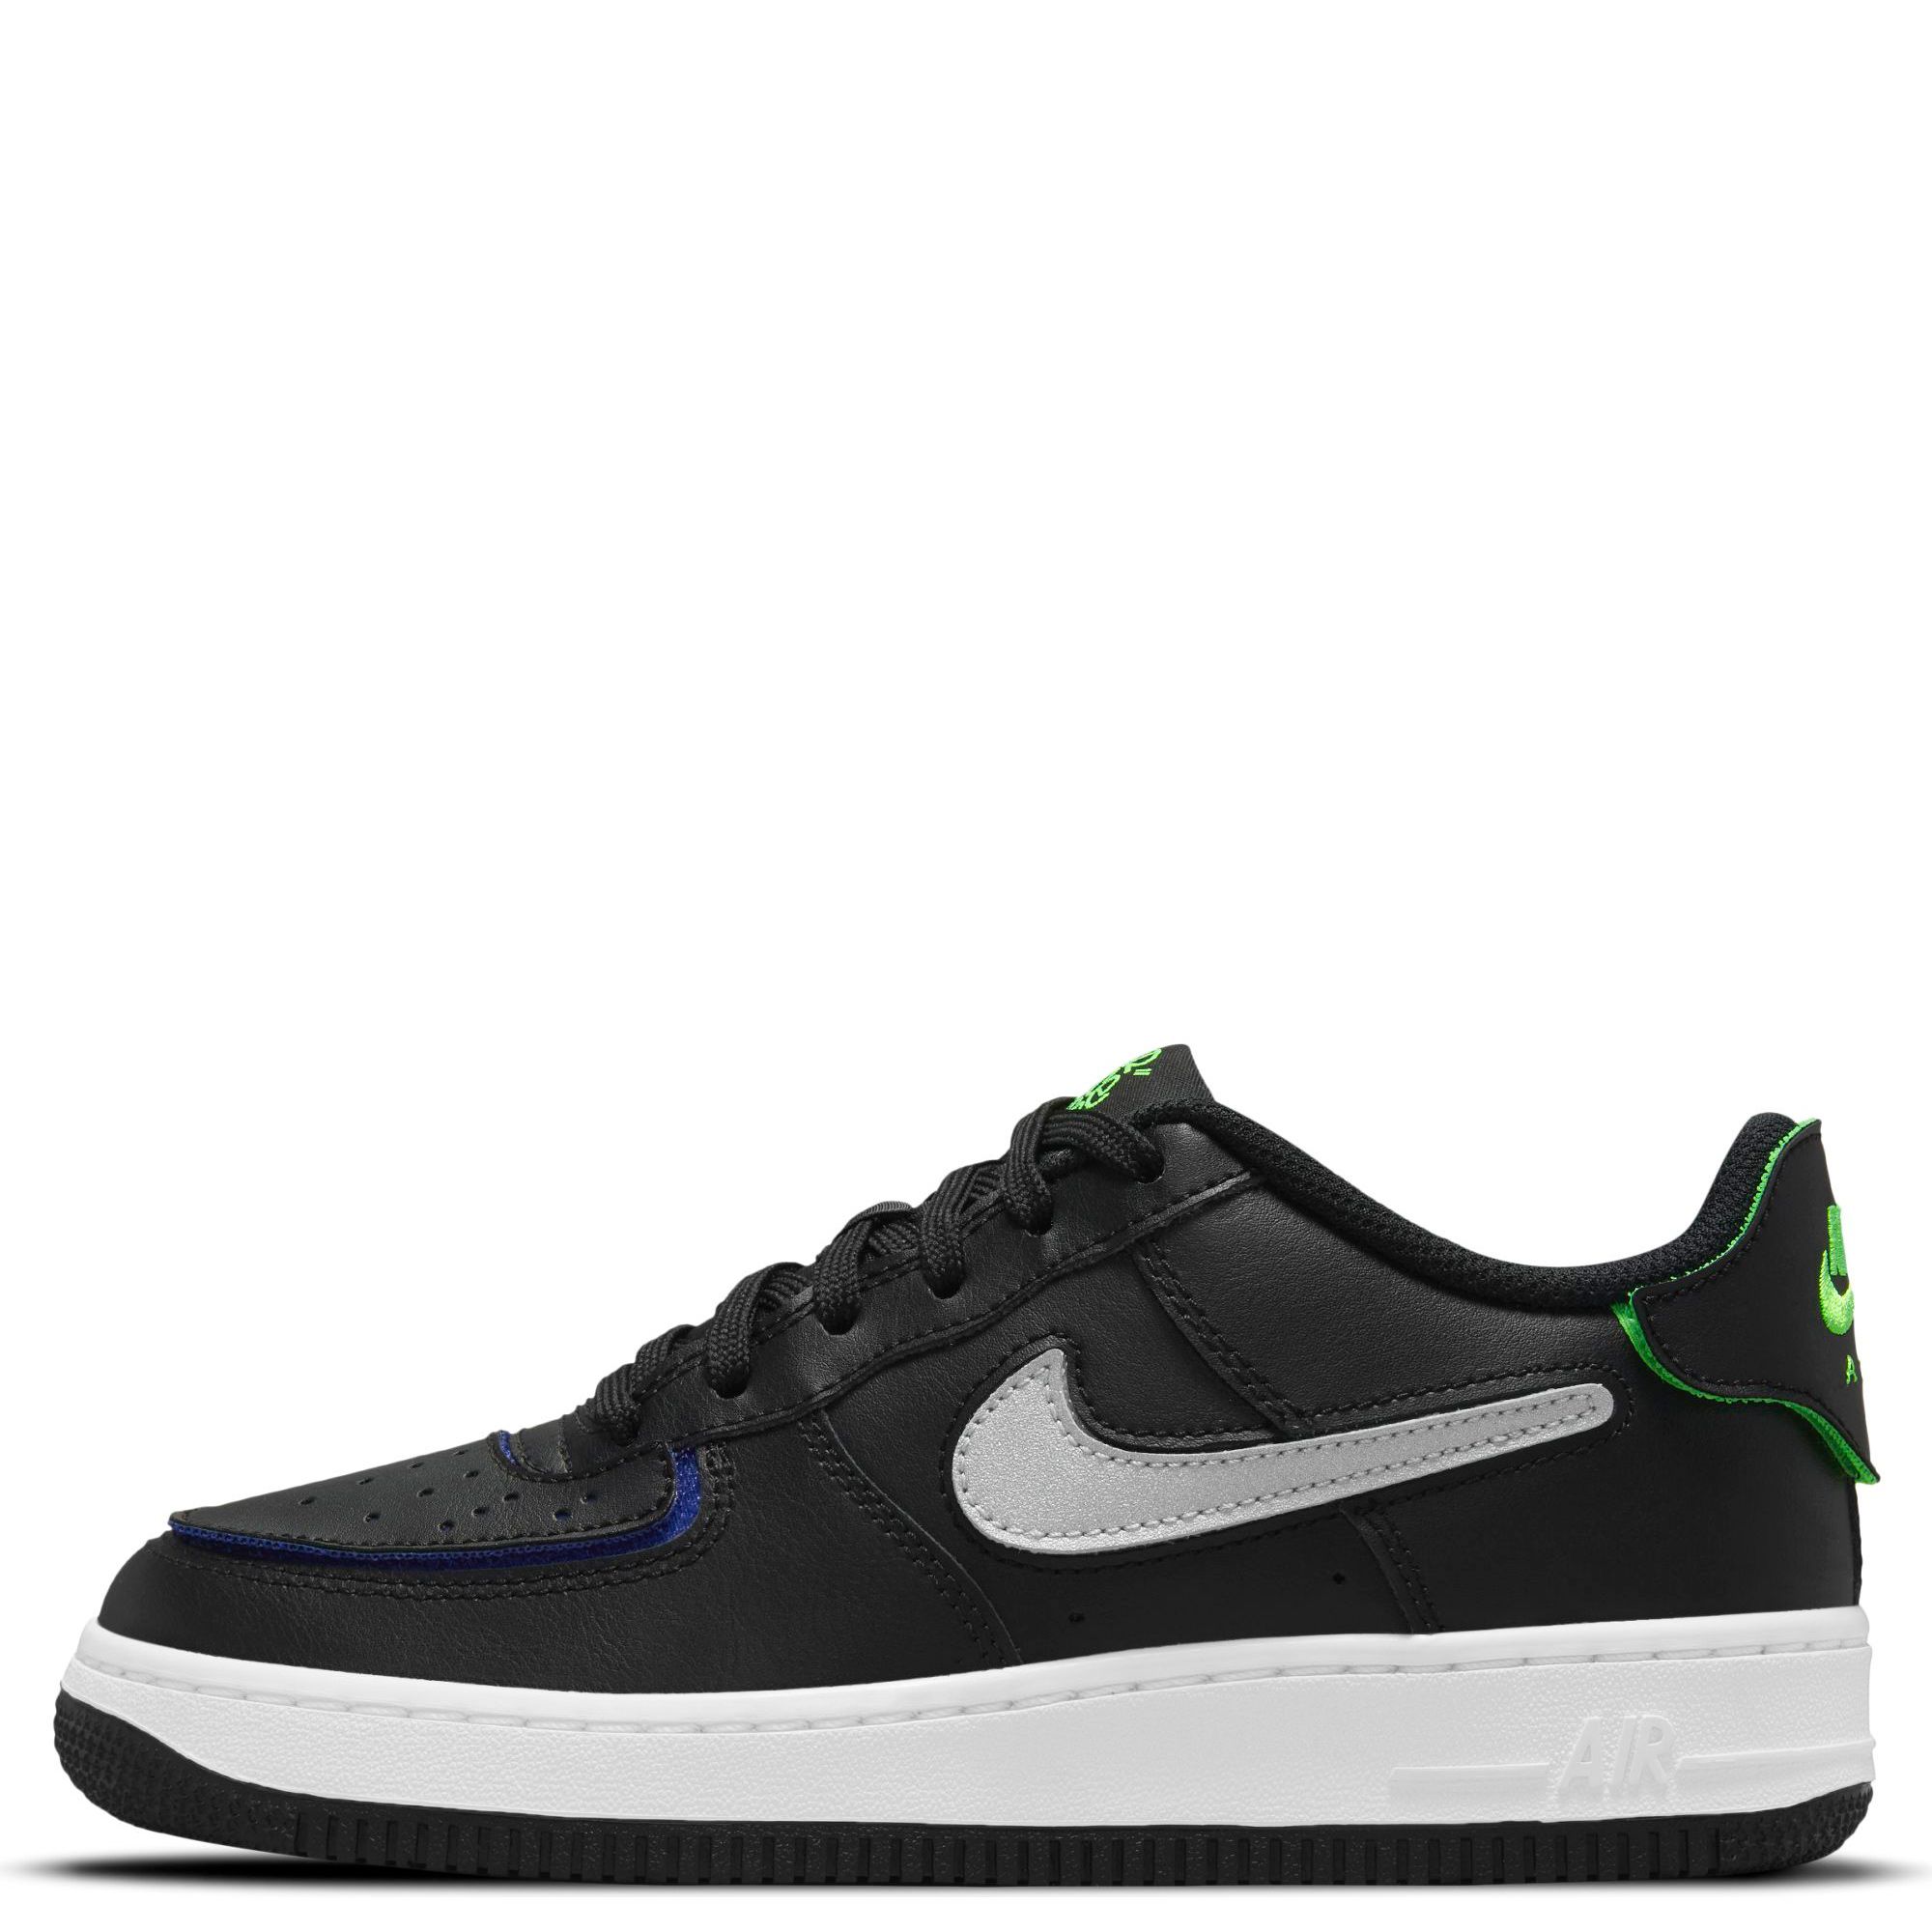 Nike Air Force 1 '07 'Patched Up - Los Angeles' | Blue | Men's Size 10.5